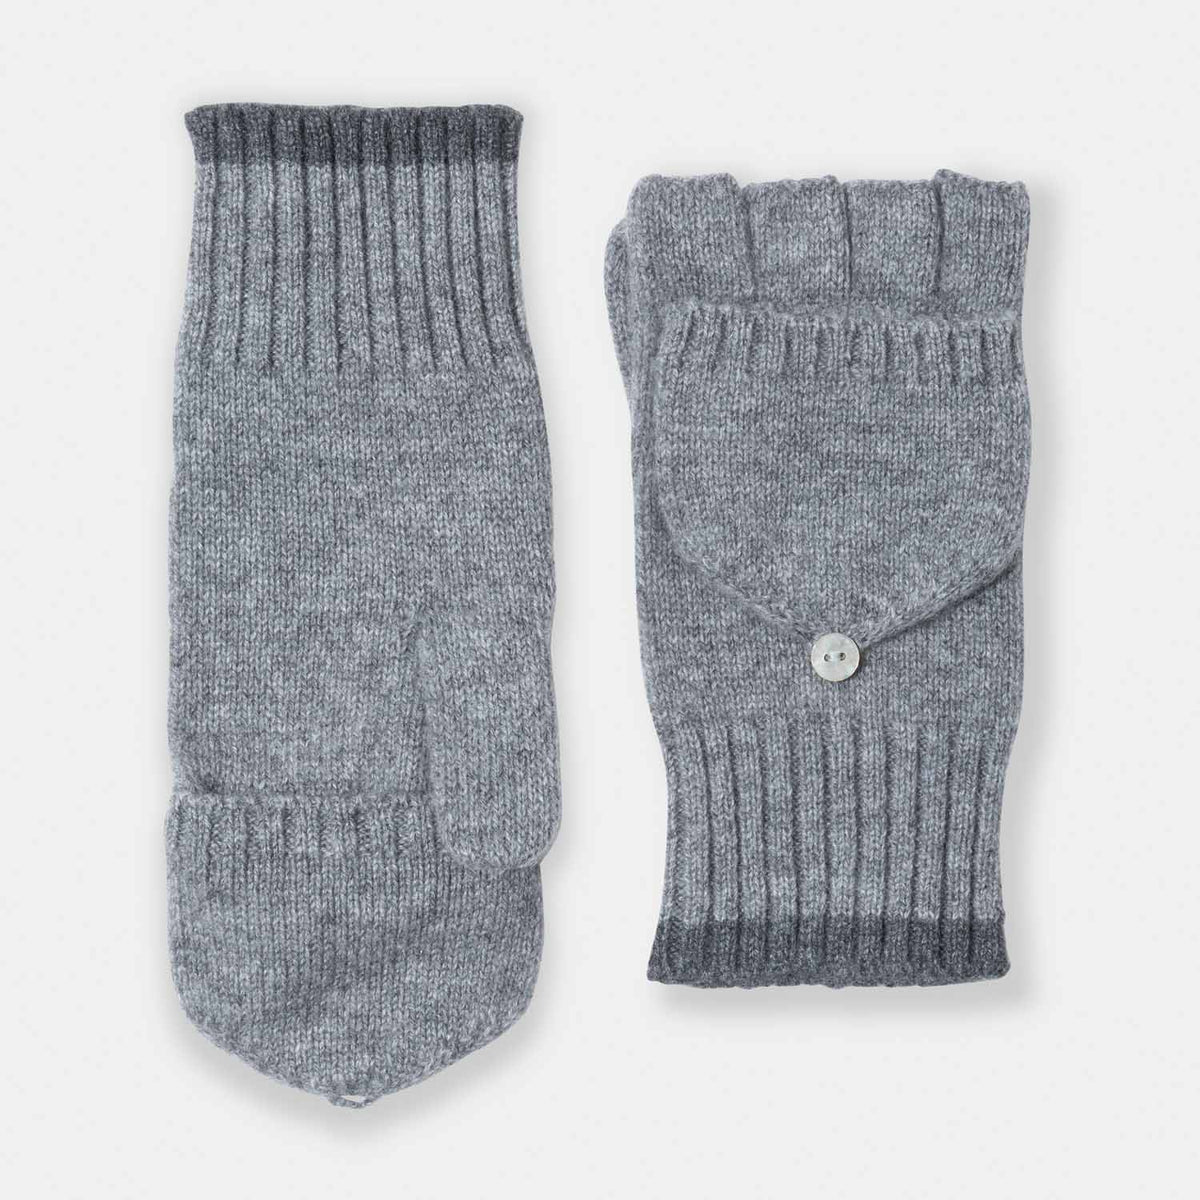 Picture of knit cashmere pop top glove, contrast color at cuff, grey and charcoal.